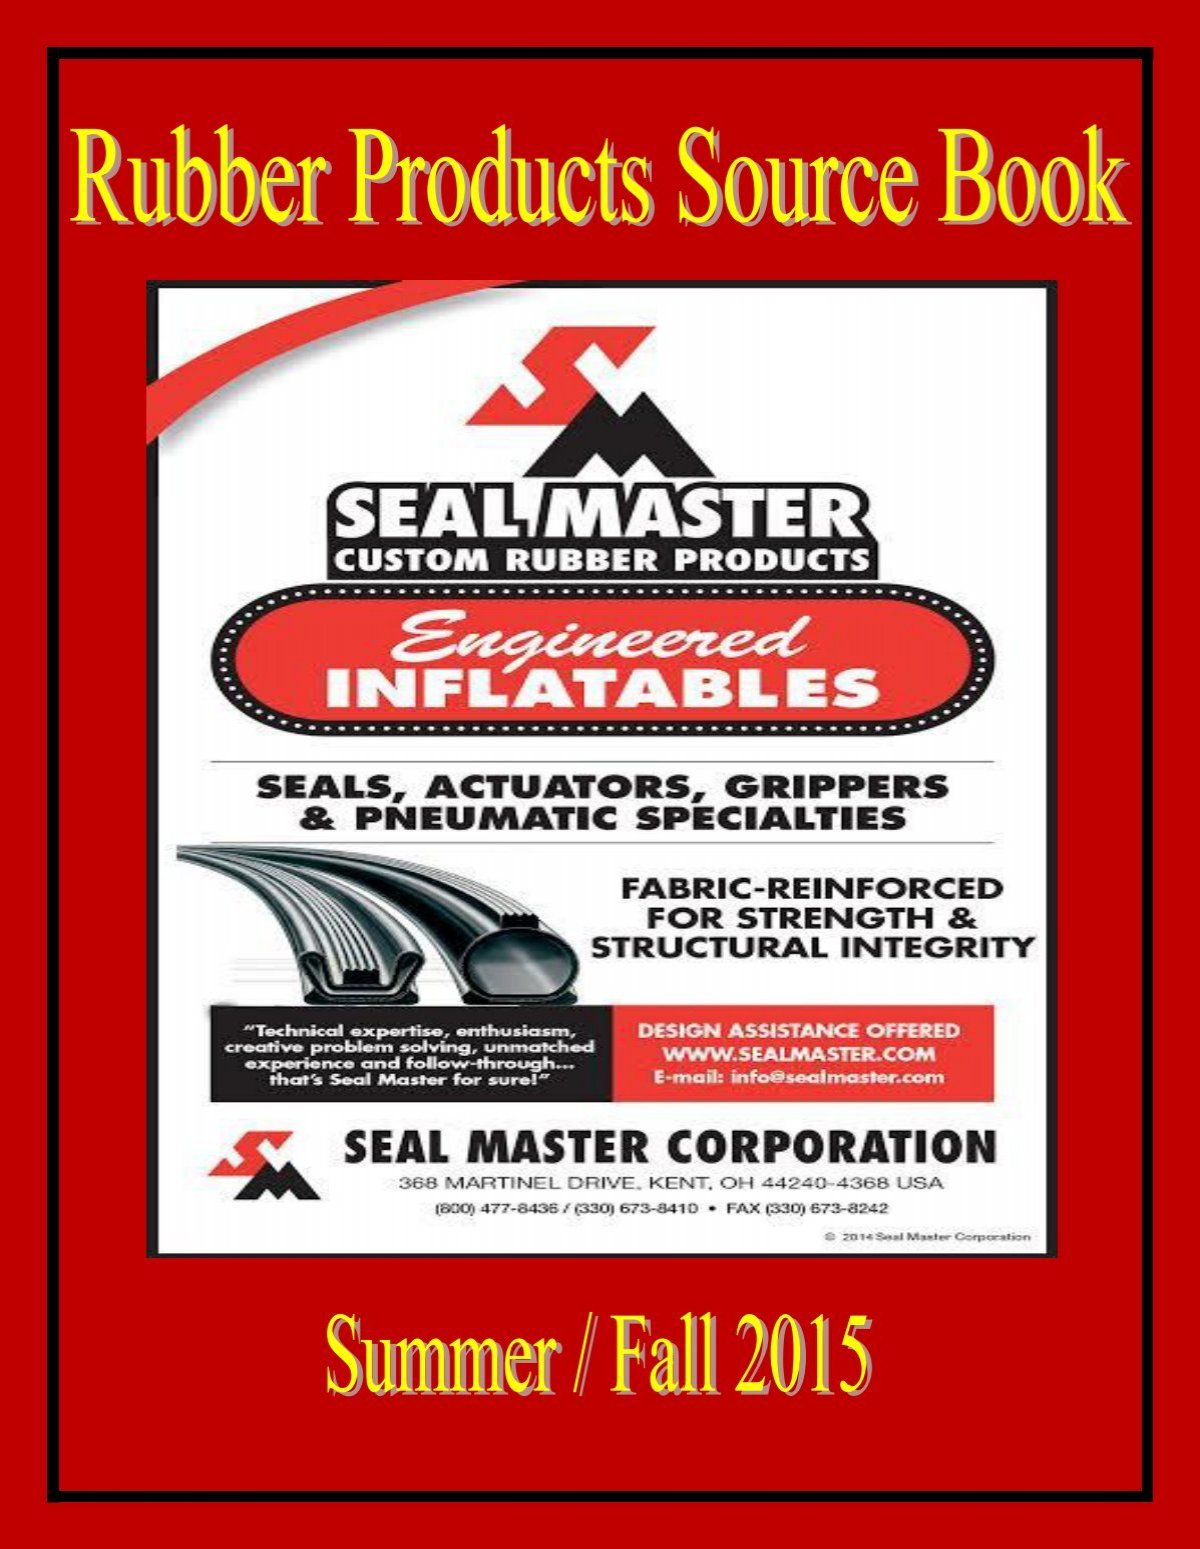 Rubber Products Source Book